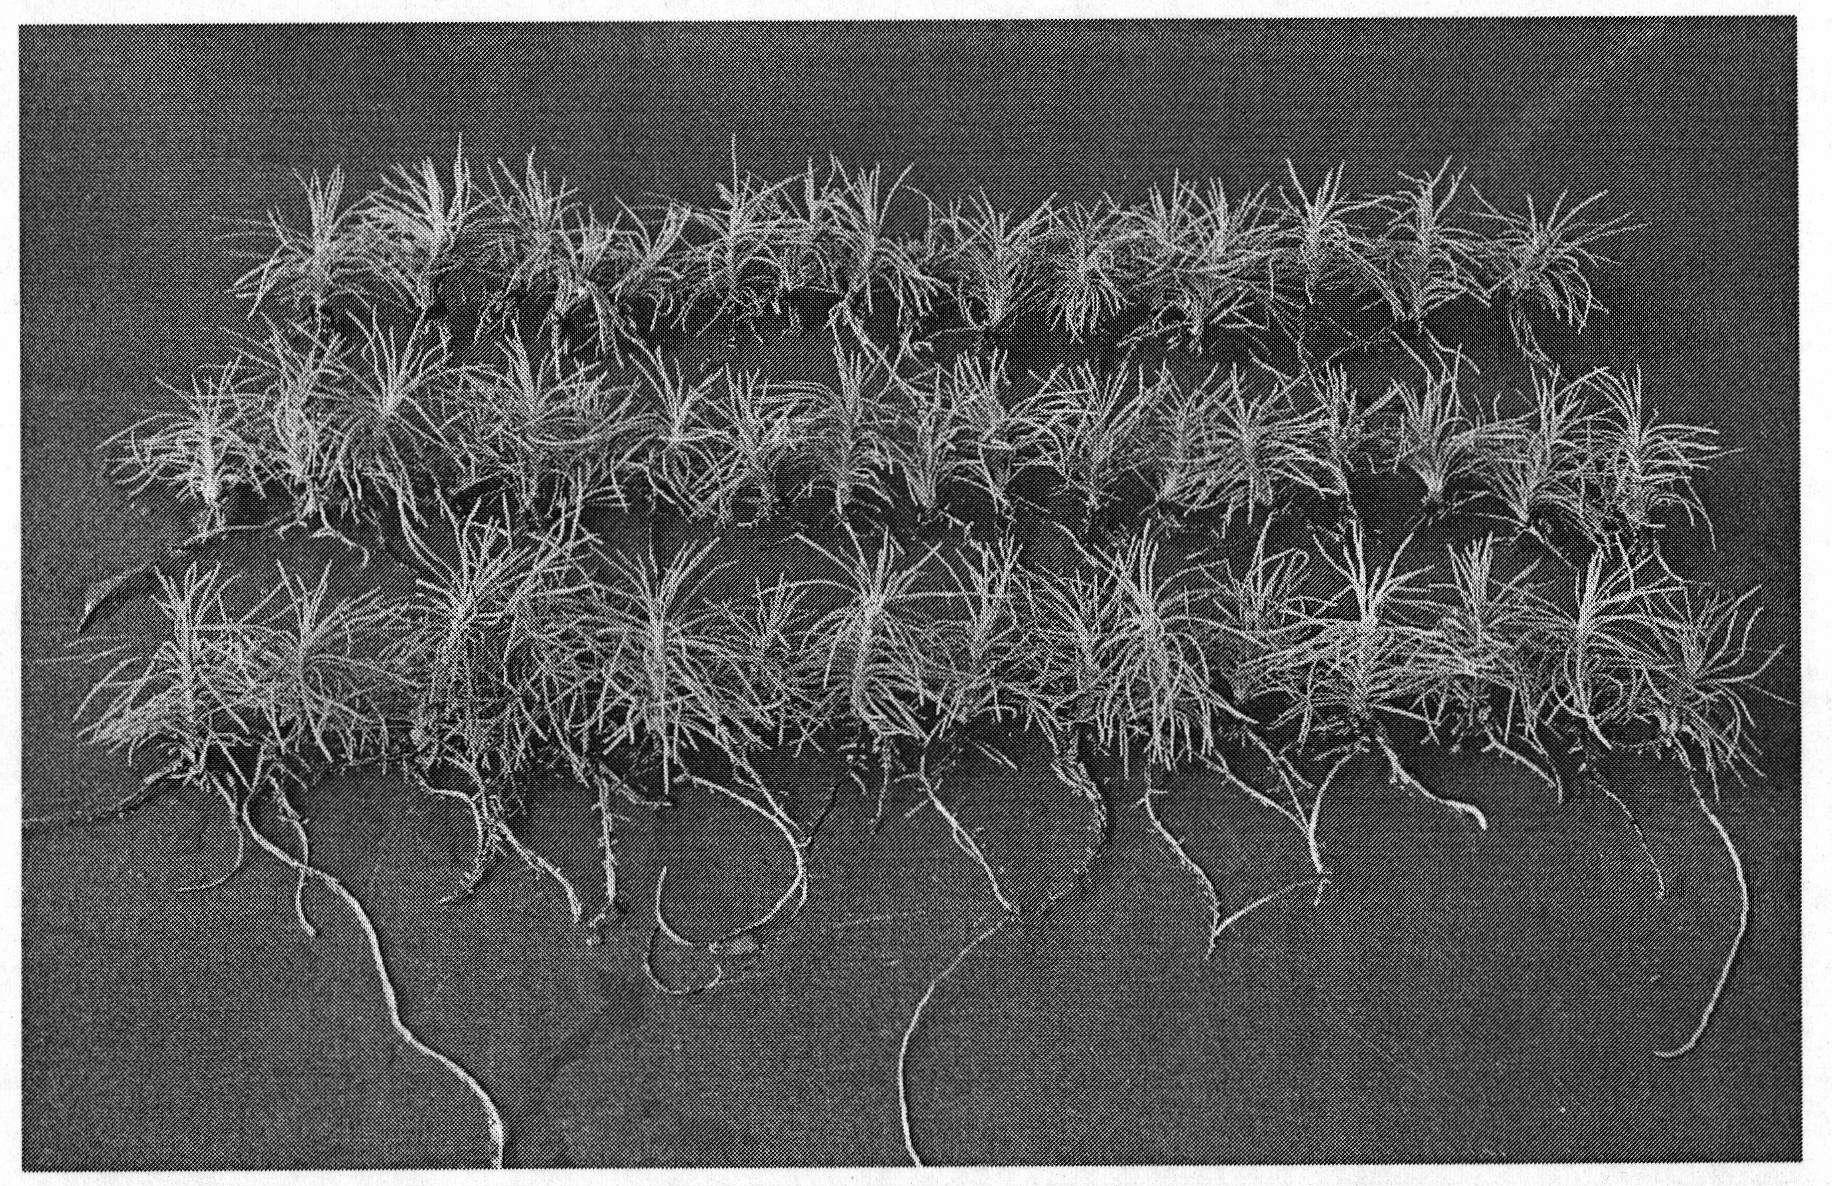 Method for efficiently inducing generation of adventitious roots of Pinus densiflora tissue culture plantlets